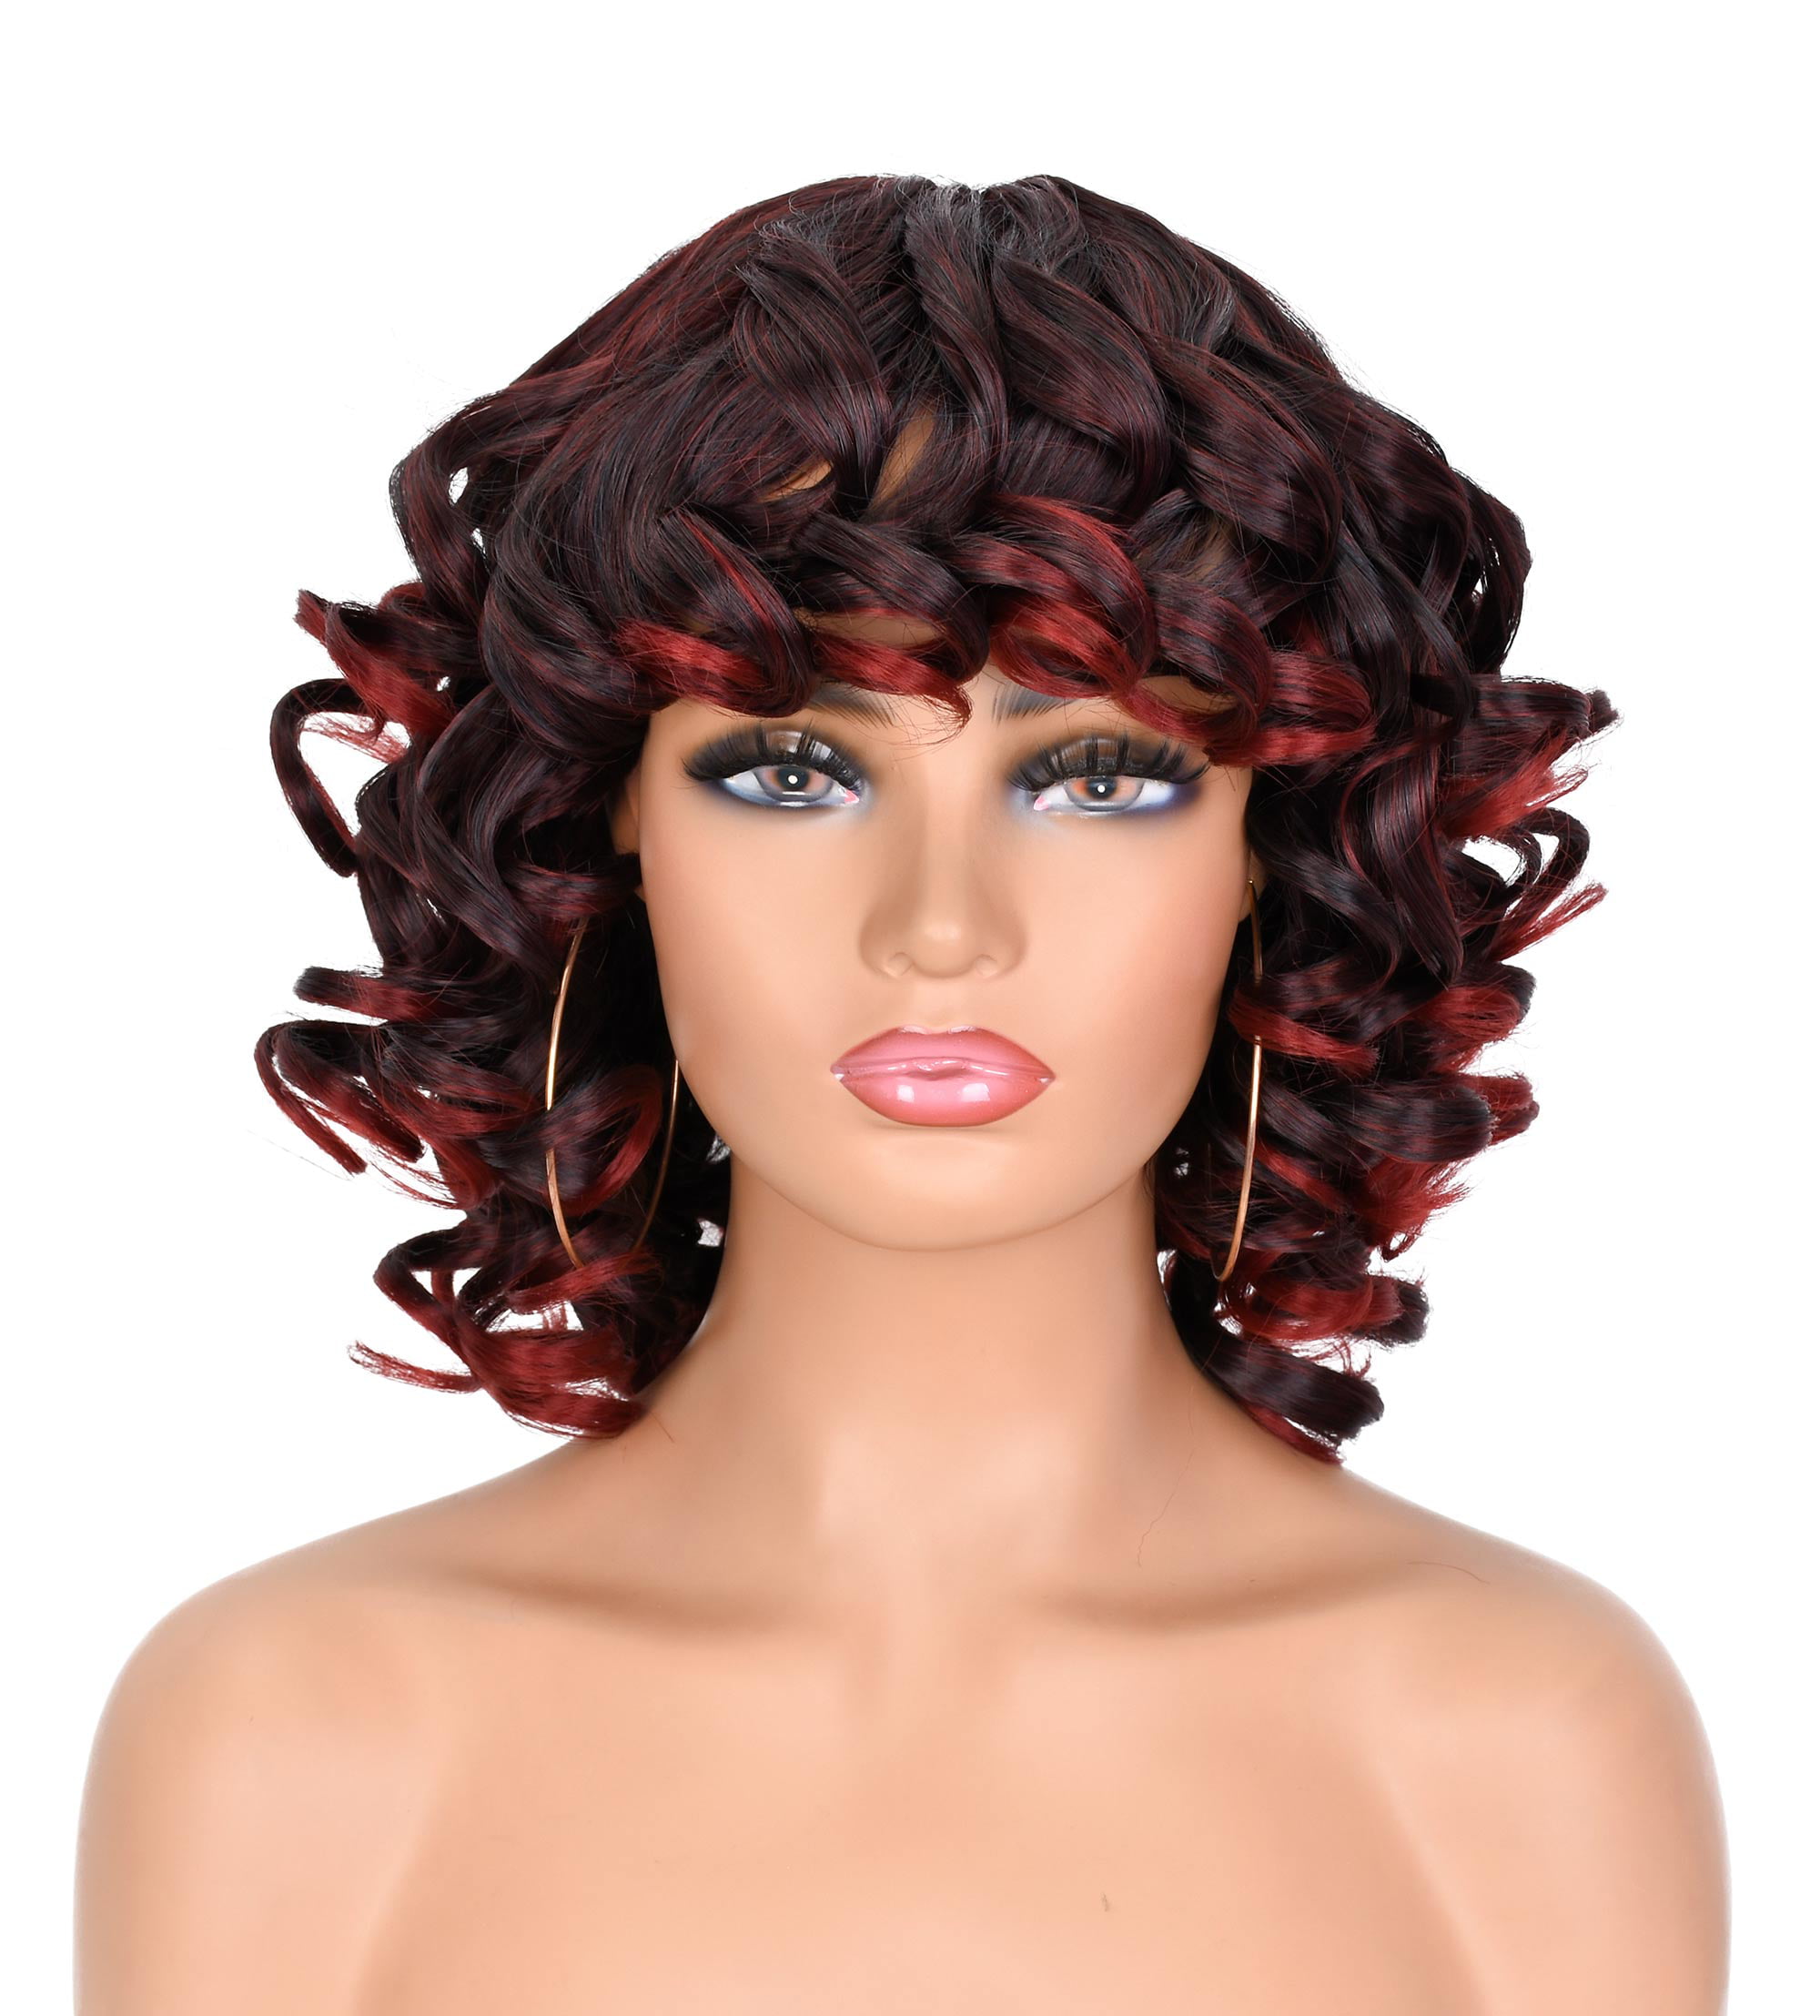 ANNISOUL Afro Curly Wigs for Women with Bangs Synthetic Short Kinky ...